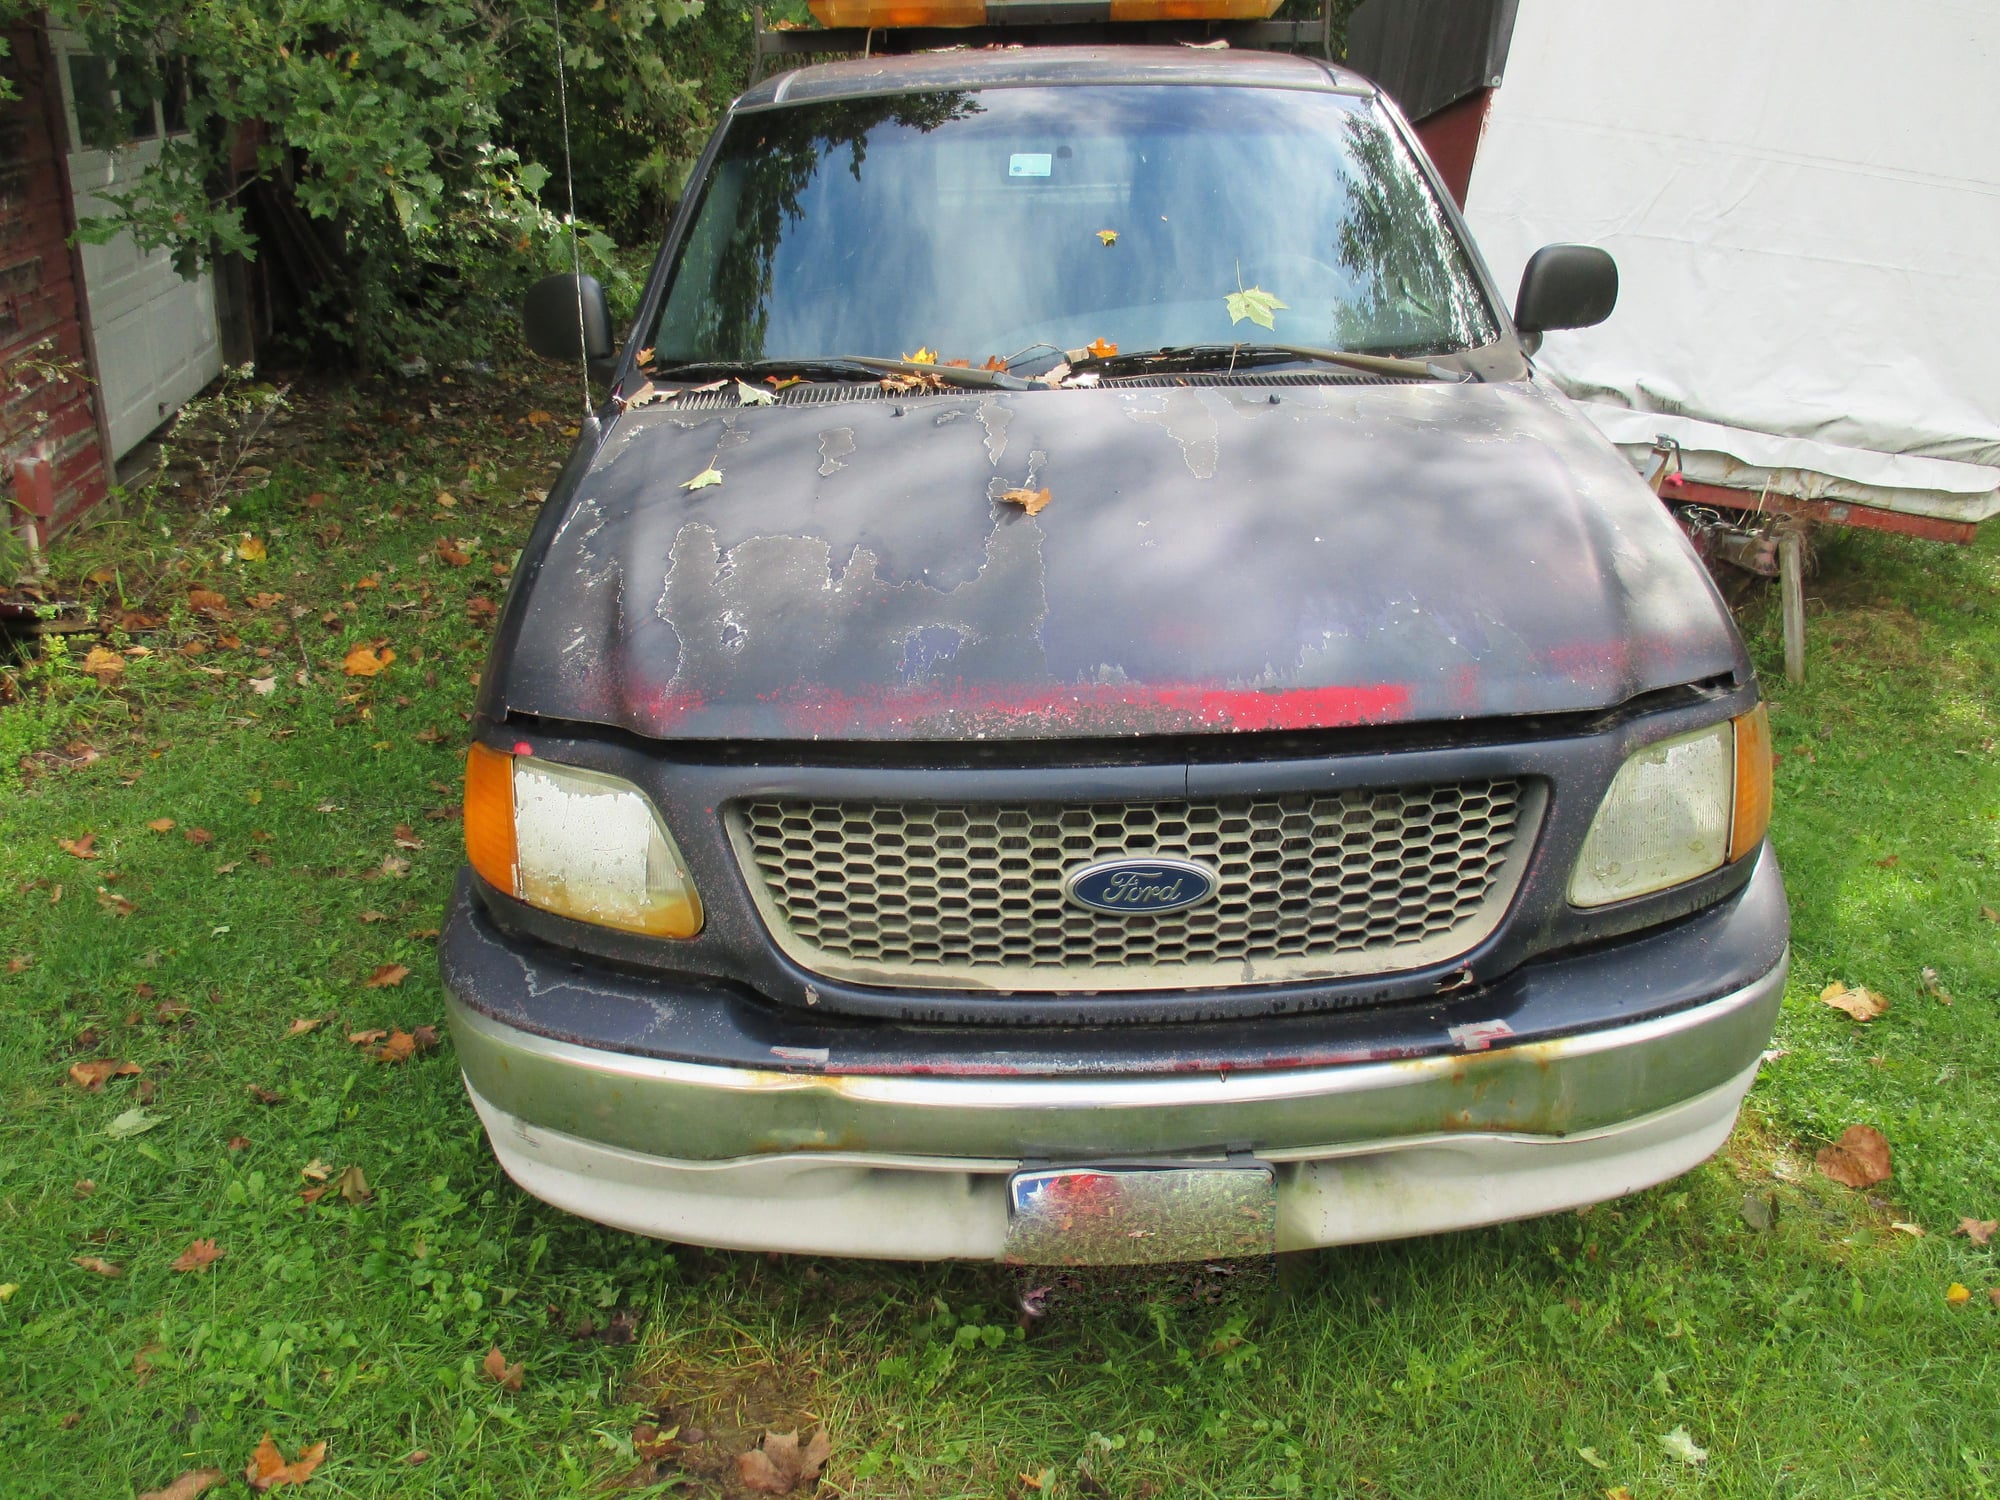 2003 Ford F-150 - 2003 F150 4.2 Auto, AC, 2WD longbed in Vermont...TEXAS TRUCK! Project or Parts source. - Used - VIN 1FTRF17213NB30251 - 300,000 Miles - 8 cyl - 2WD - Automatic - Truck - Blue - Bridport, VT 05734, United States